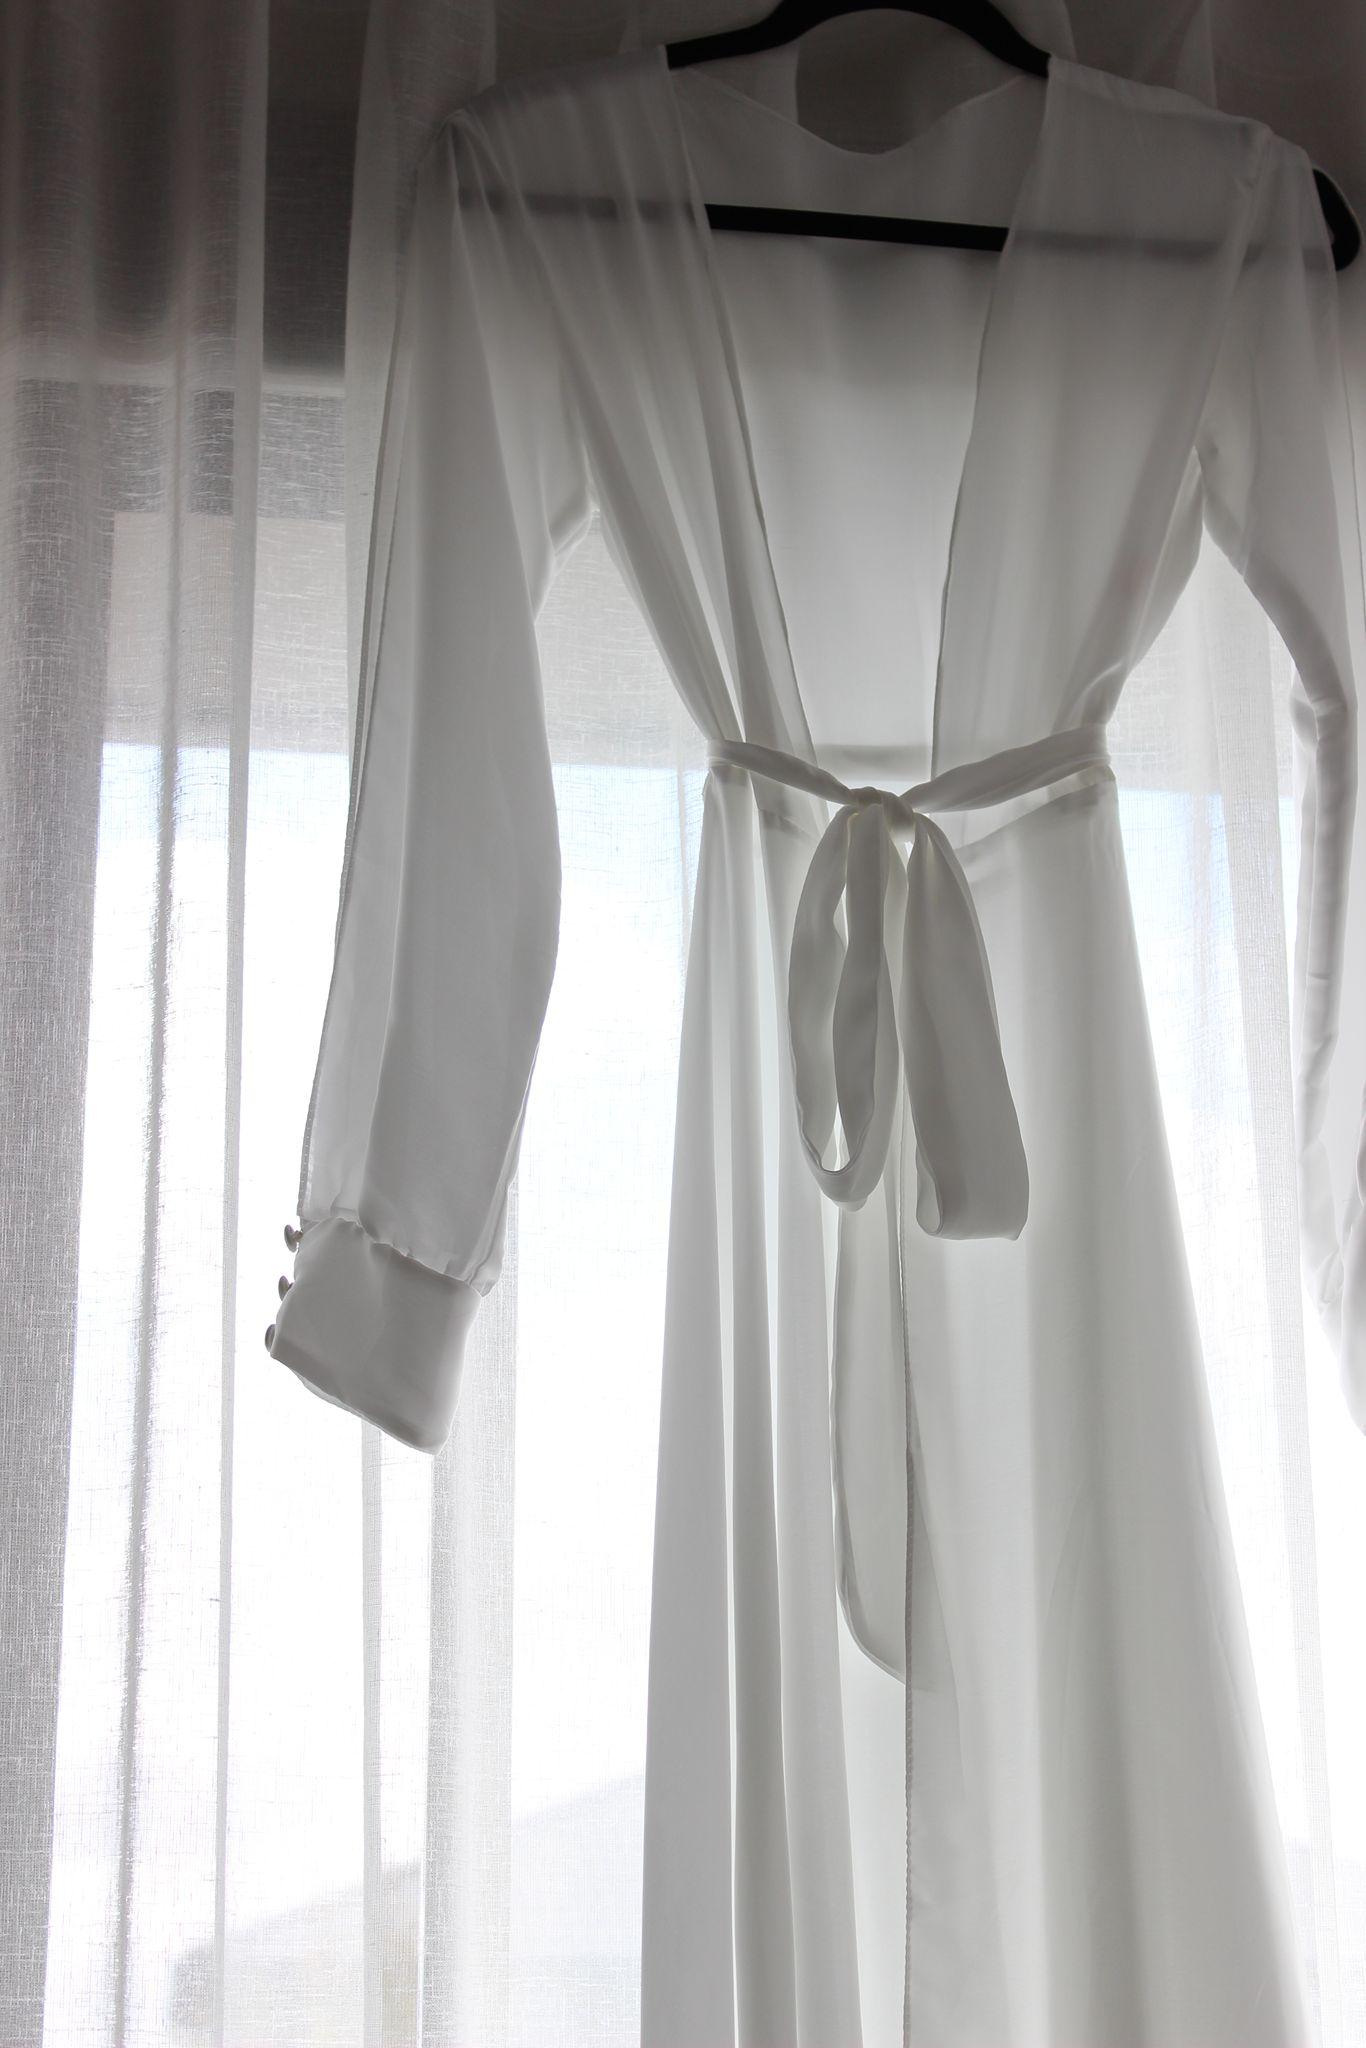 Amore Collective bridal wedding accessories robes slips